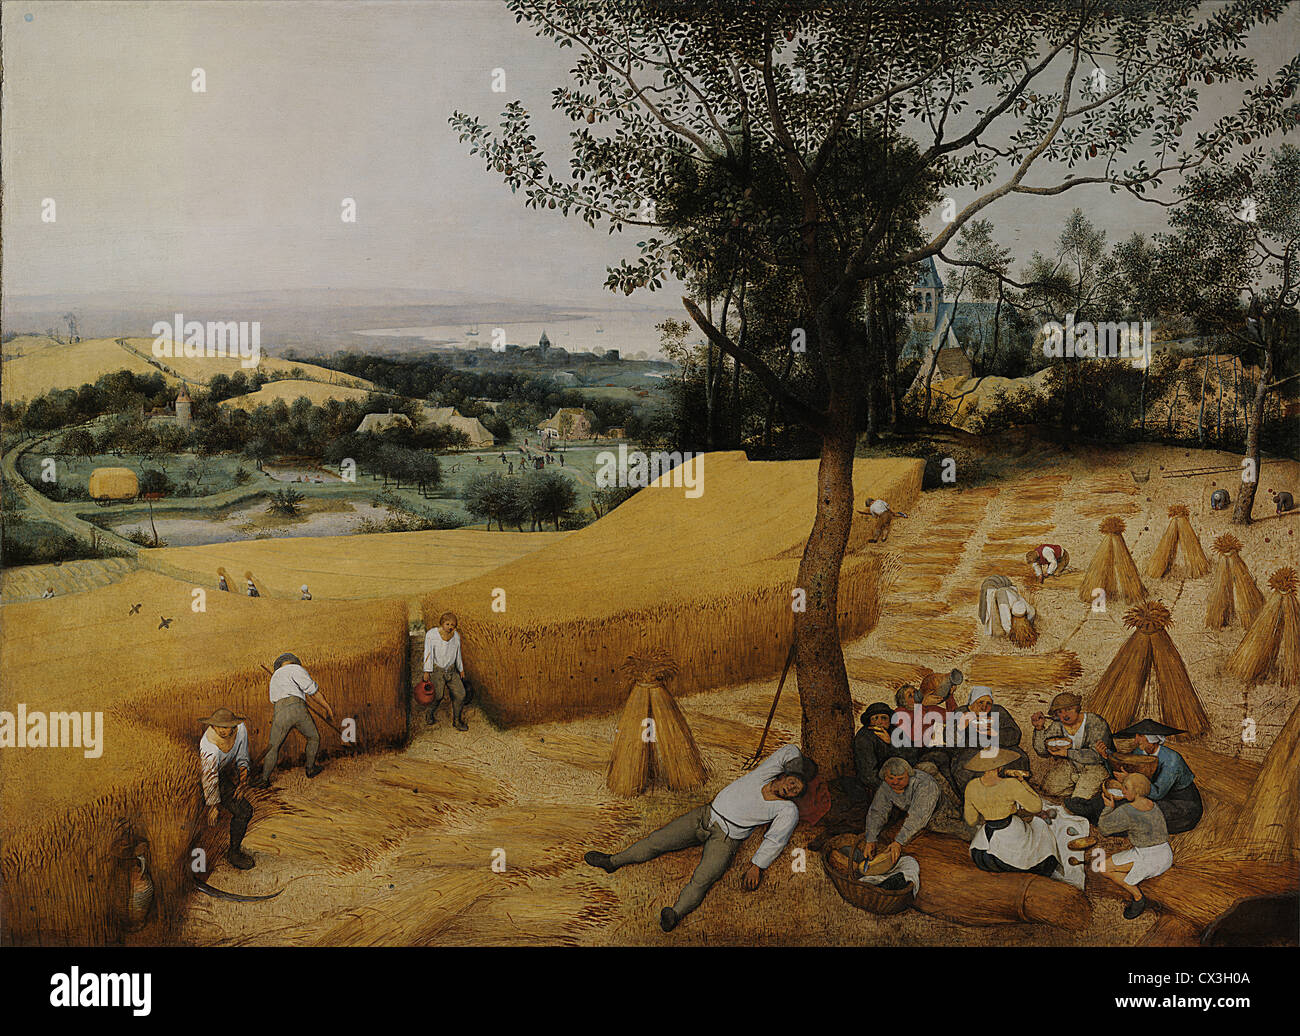 The Harvesters (1565) by Pieter Bruegel (Brueghel) the Elder  - Very high quality and resolution image of this oil on wood panel work. Stock Photo